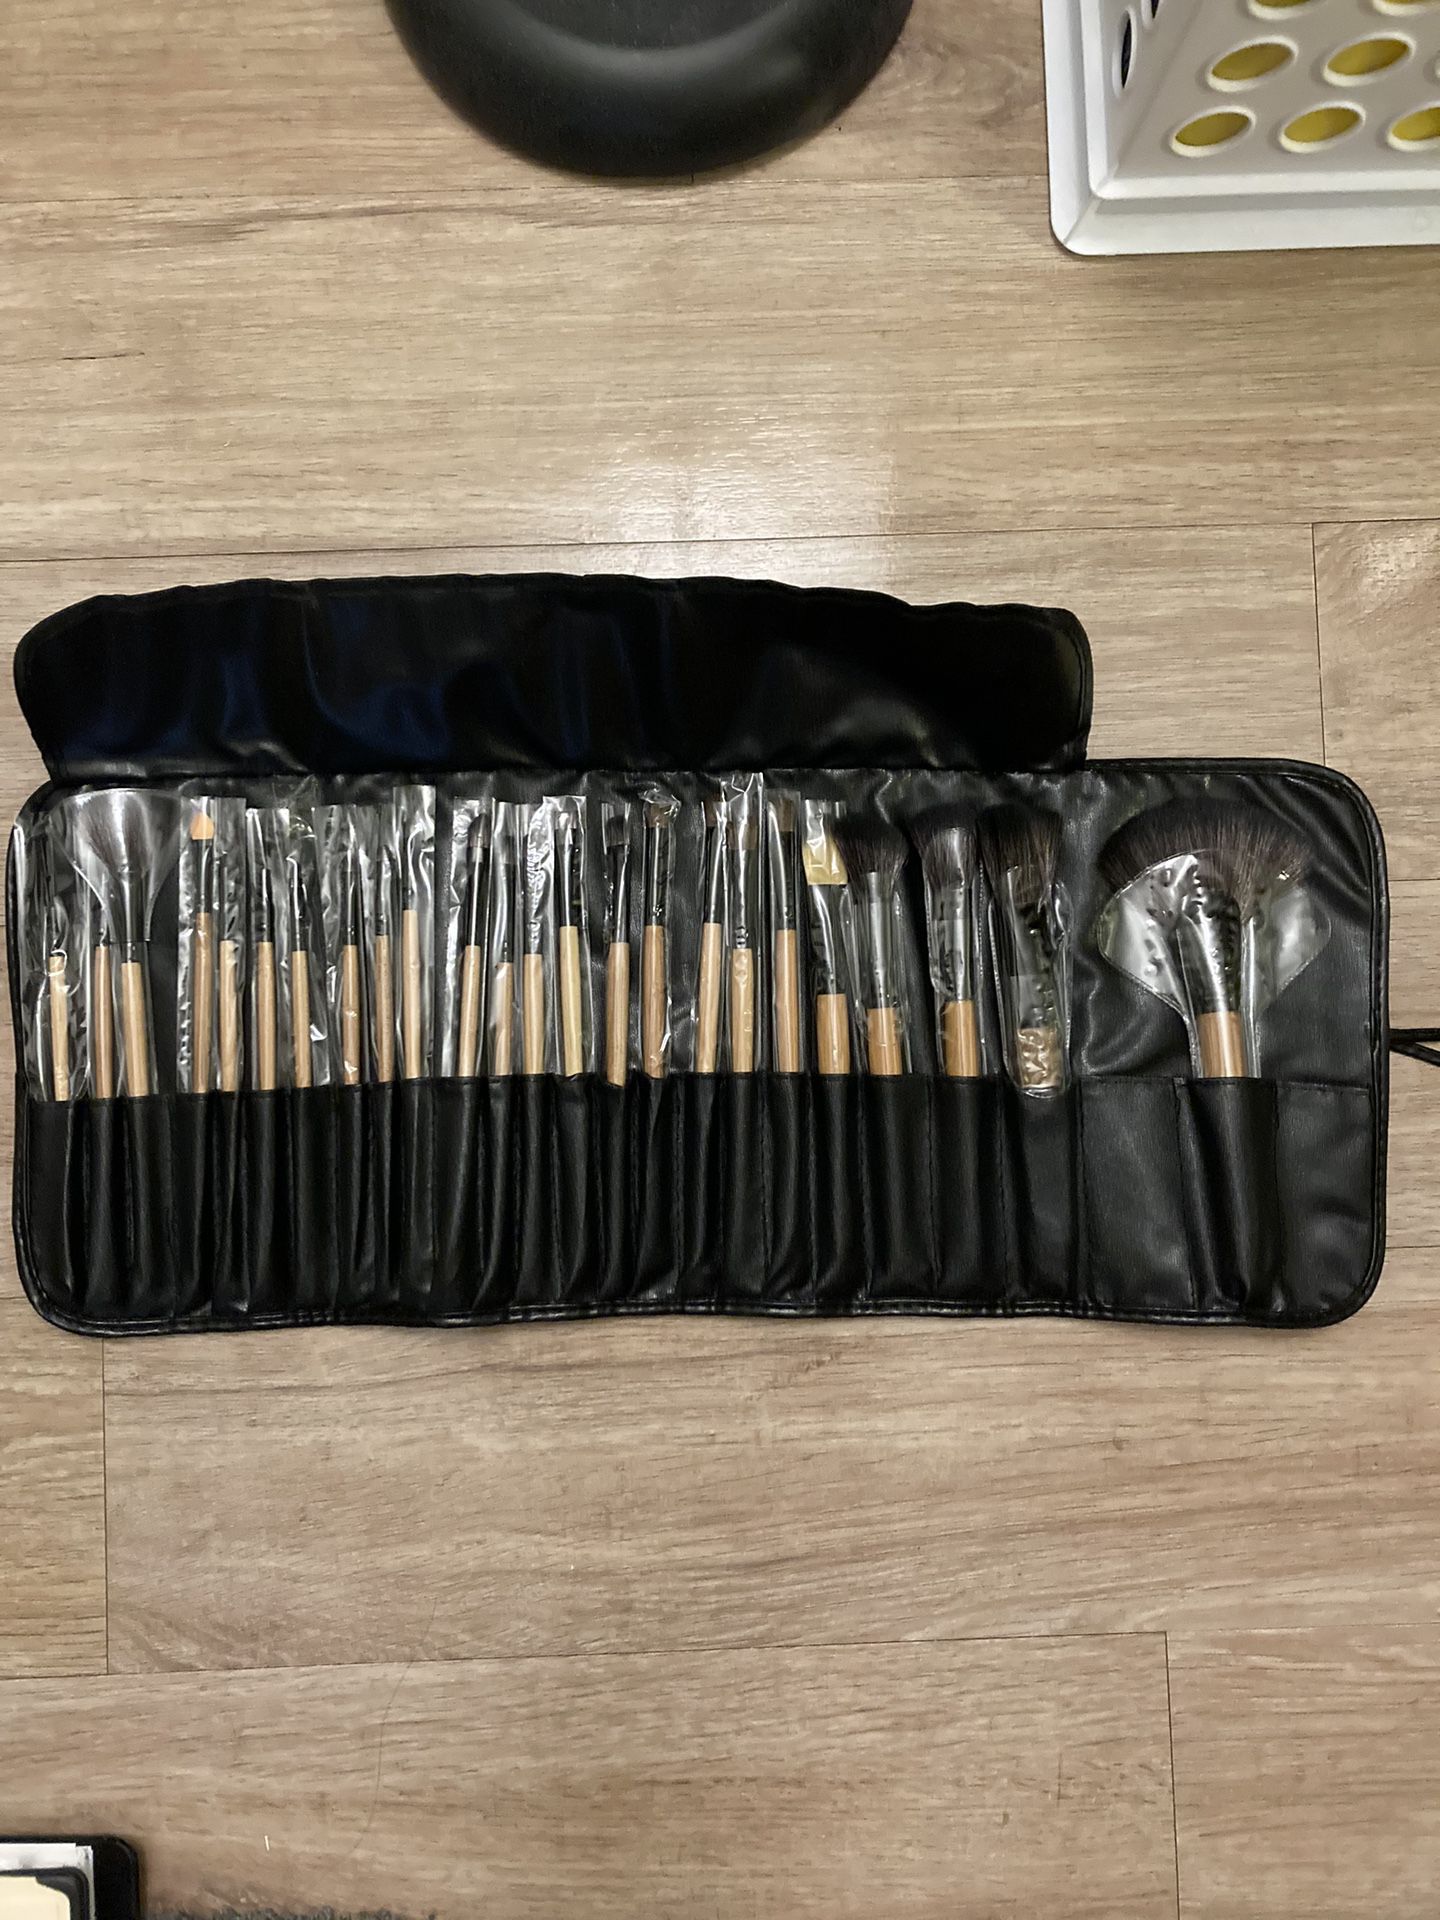 24 Make Up Brushes In Roll Up Case  NEW